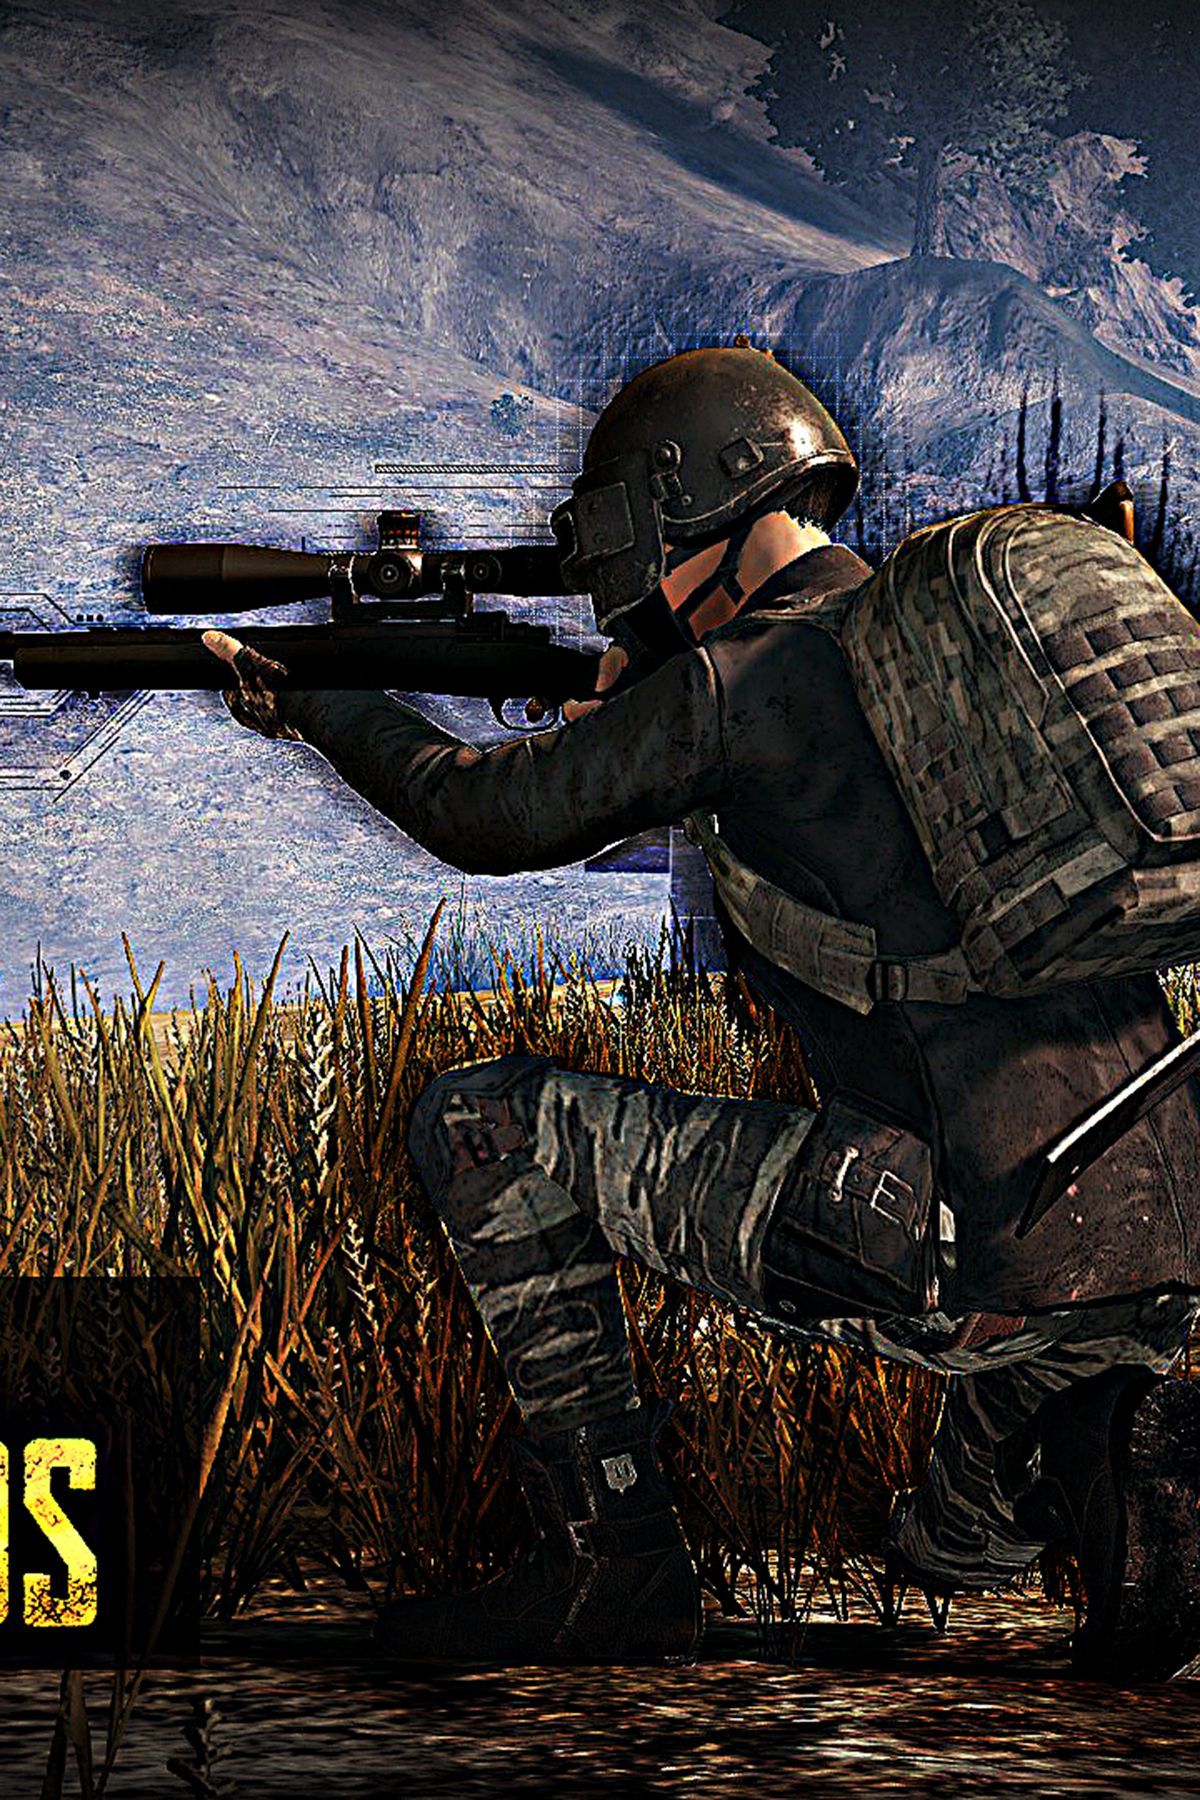 PUBG AWM Snipping Player Game mobile wallpaper. Mobile wallpaper